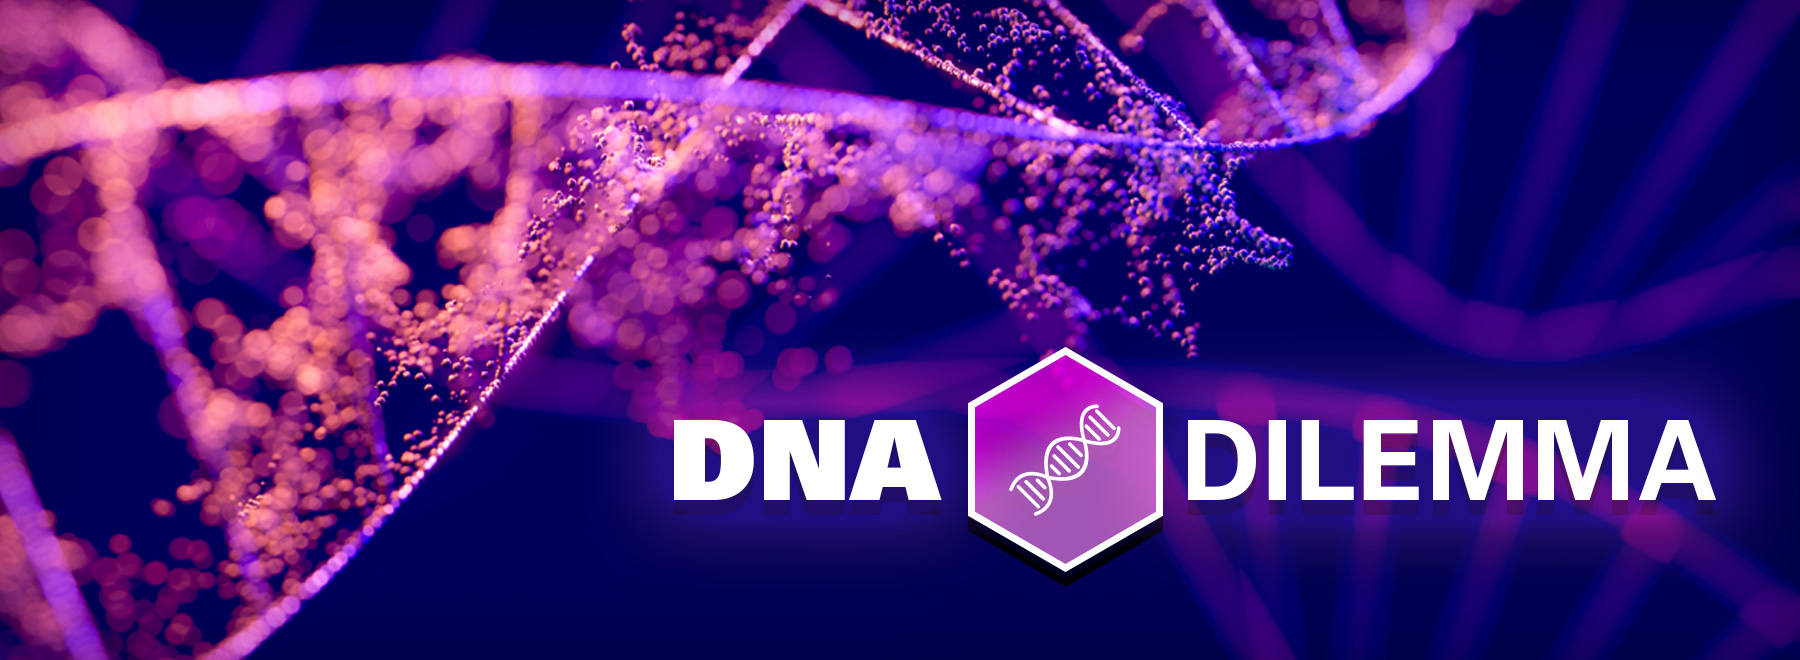 DNA Strand on purple background with title DNA Dilemma